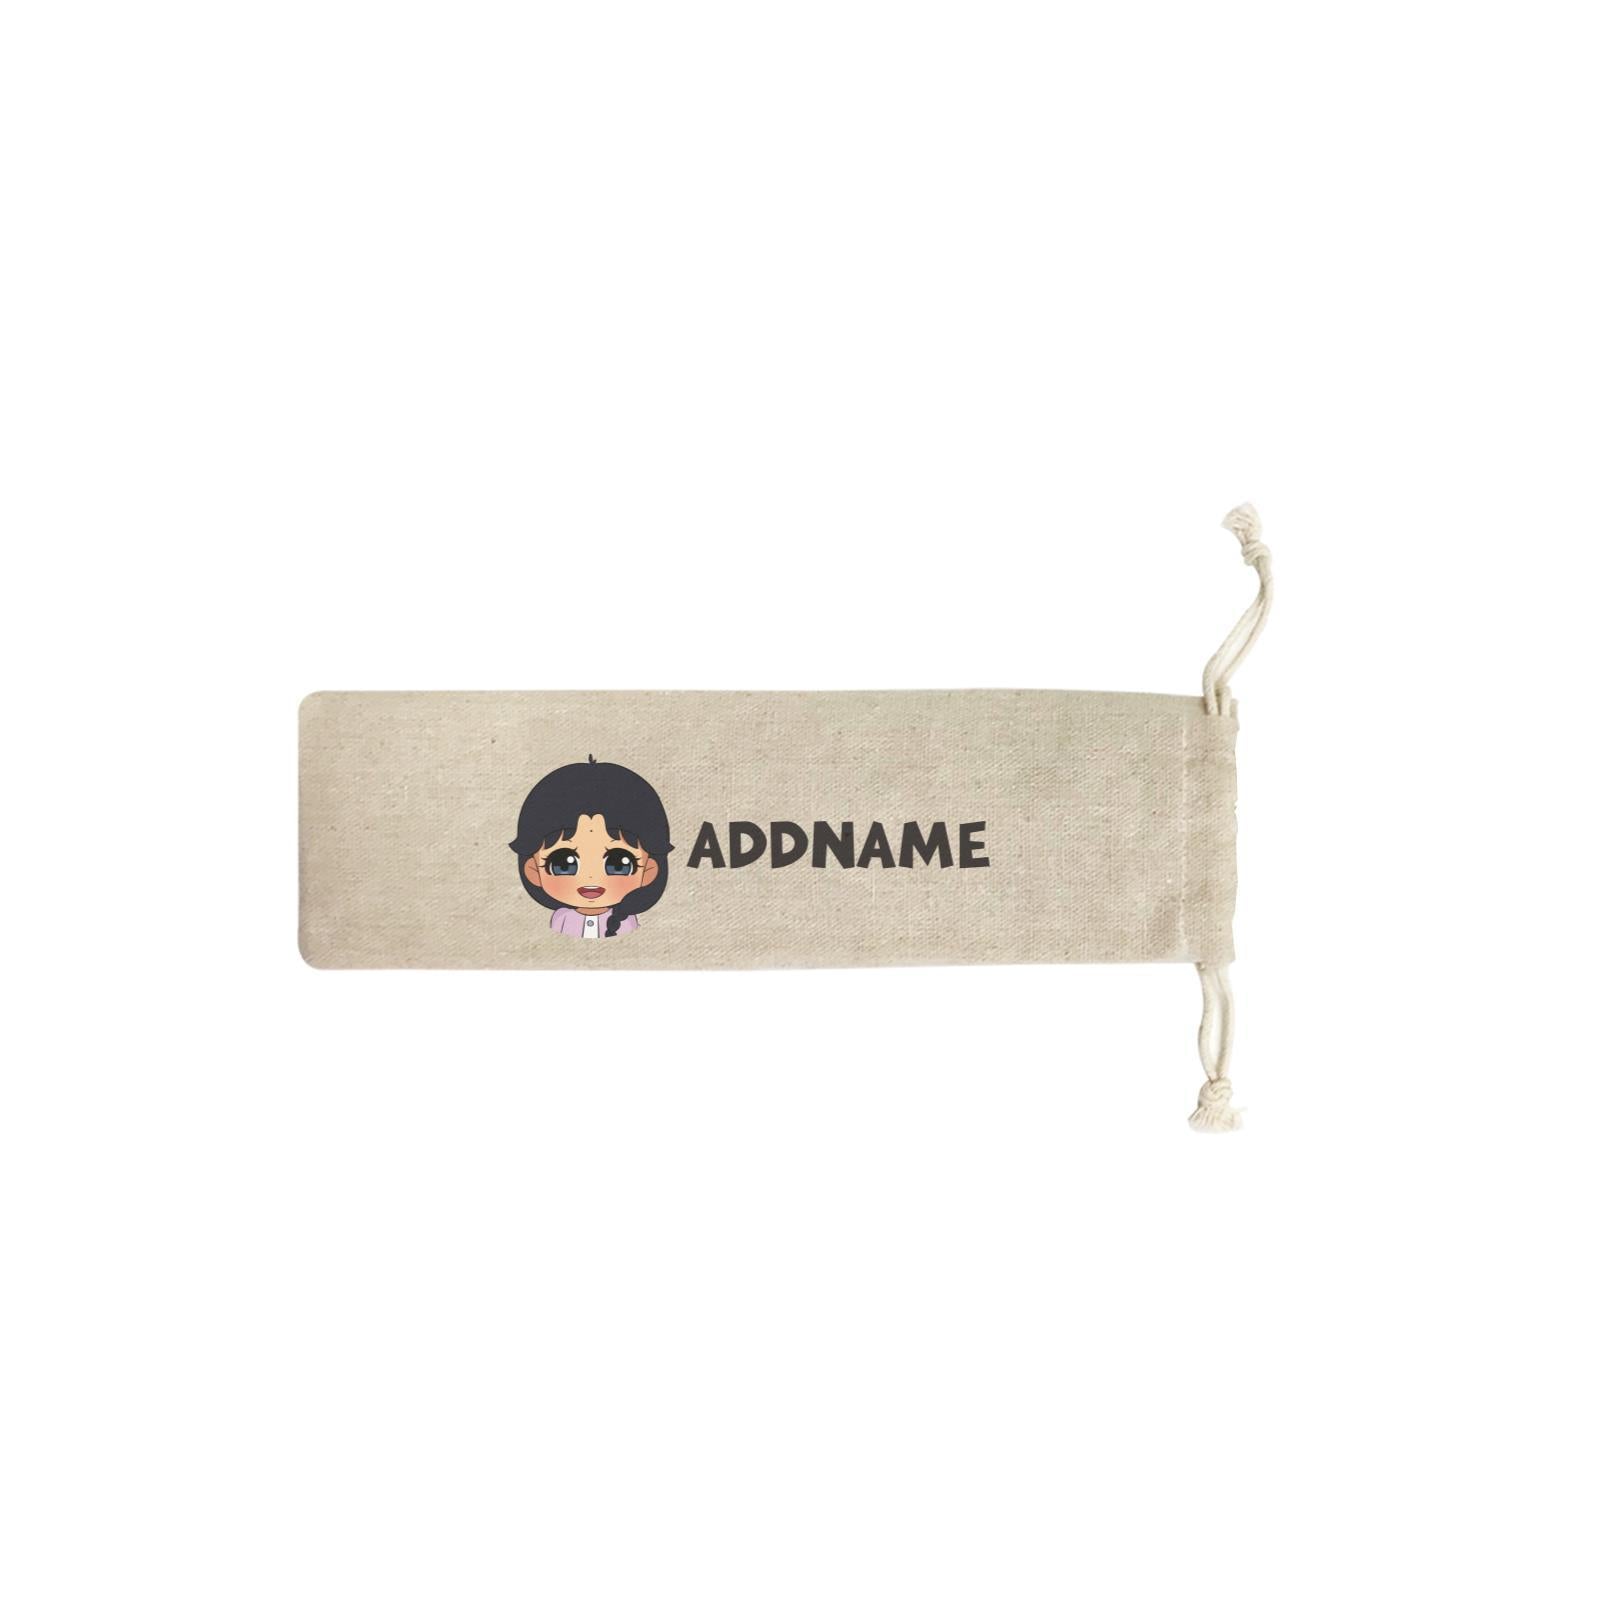 Children's Day Gift Series Little Indian Girl Addname SB Straw Pouch (No Straws included)